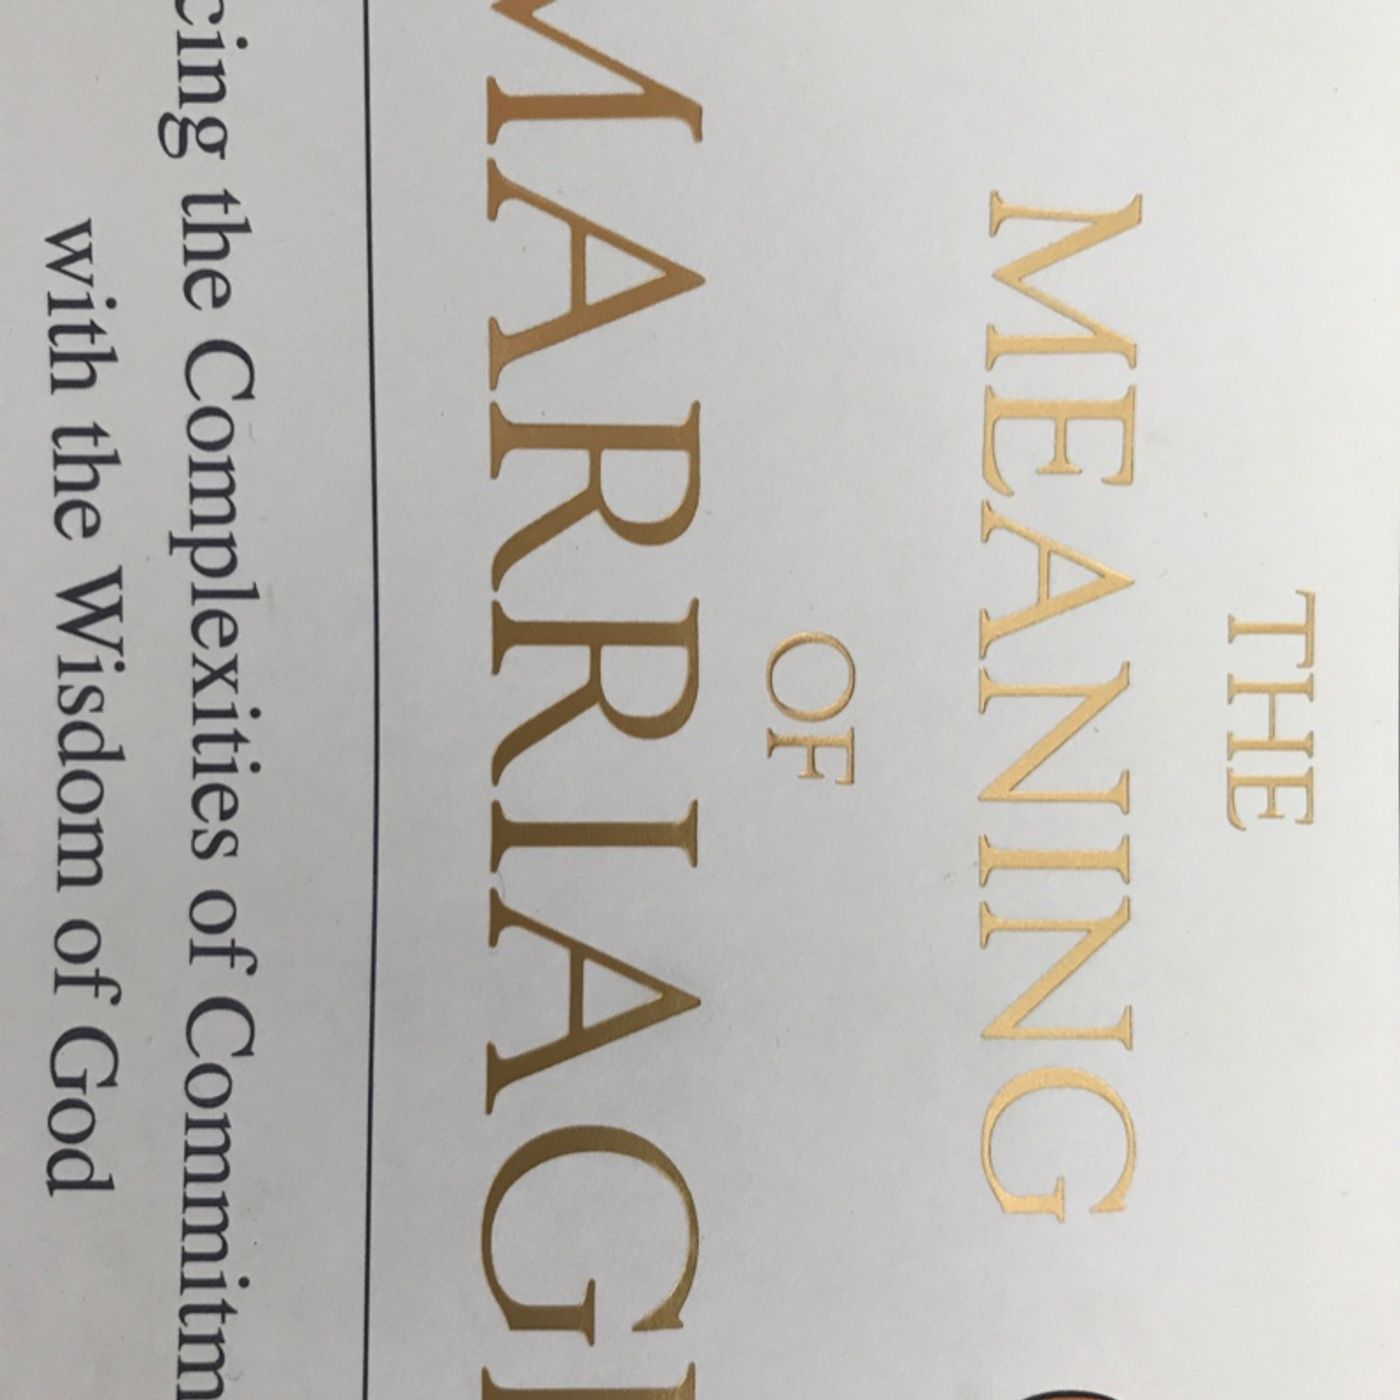 Brian Kirk's Meaning Of Marriage